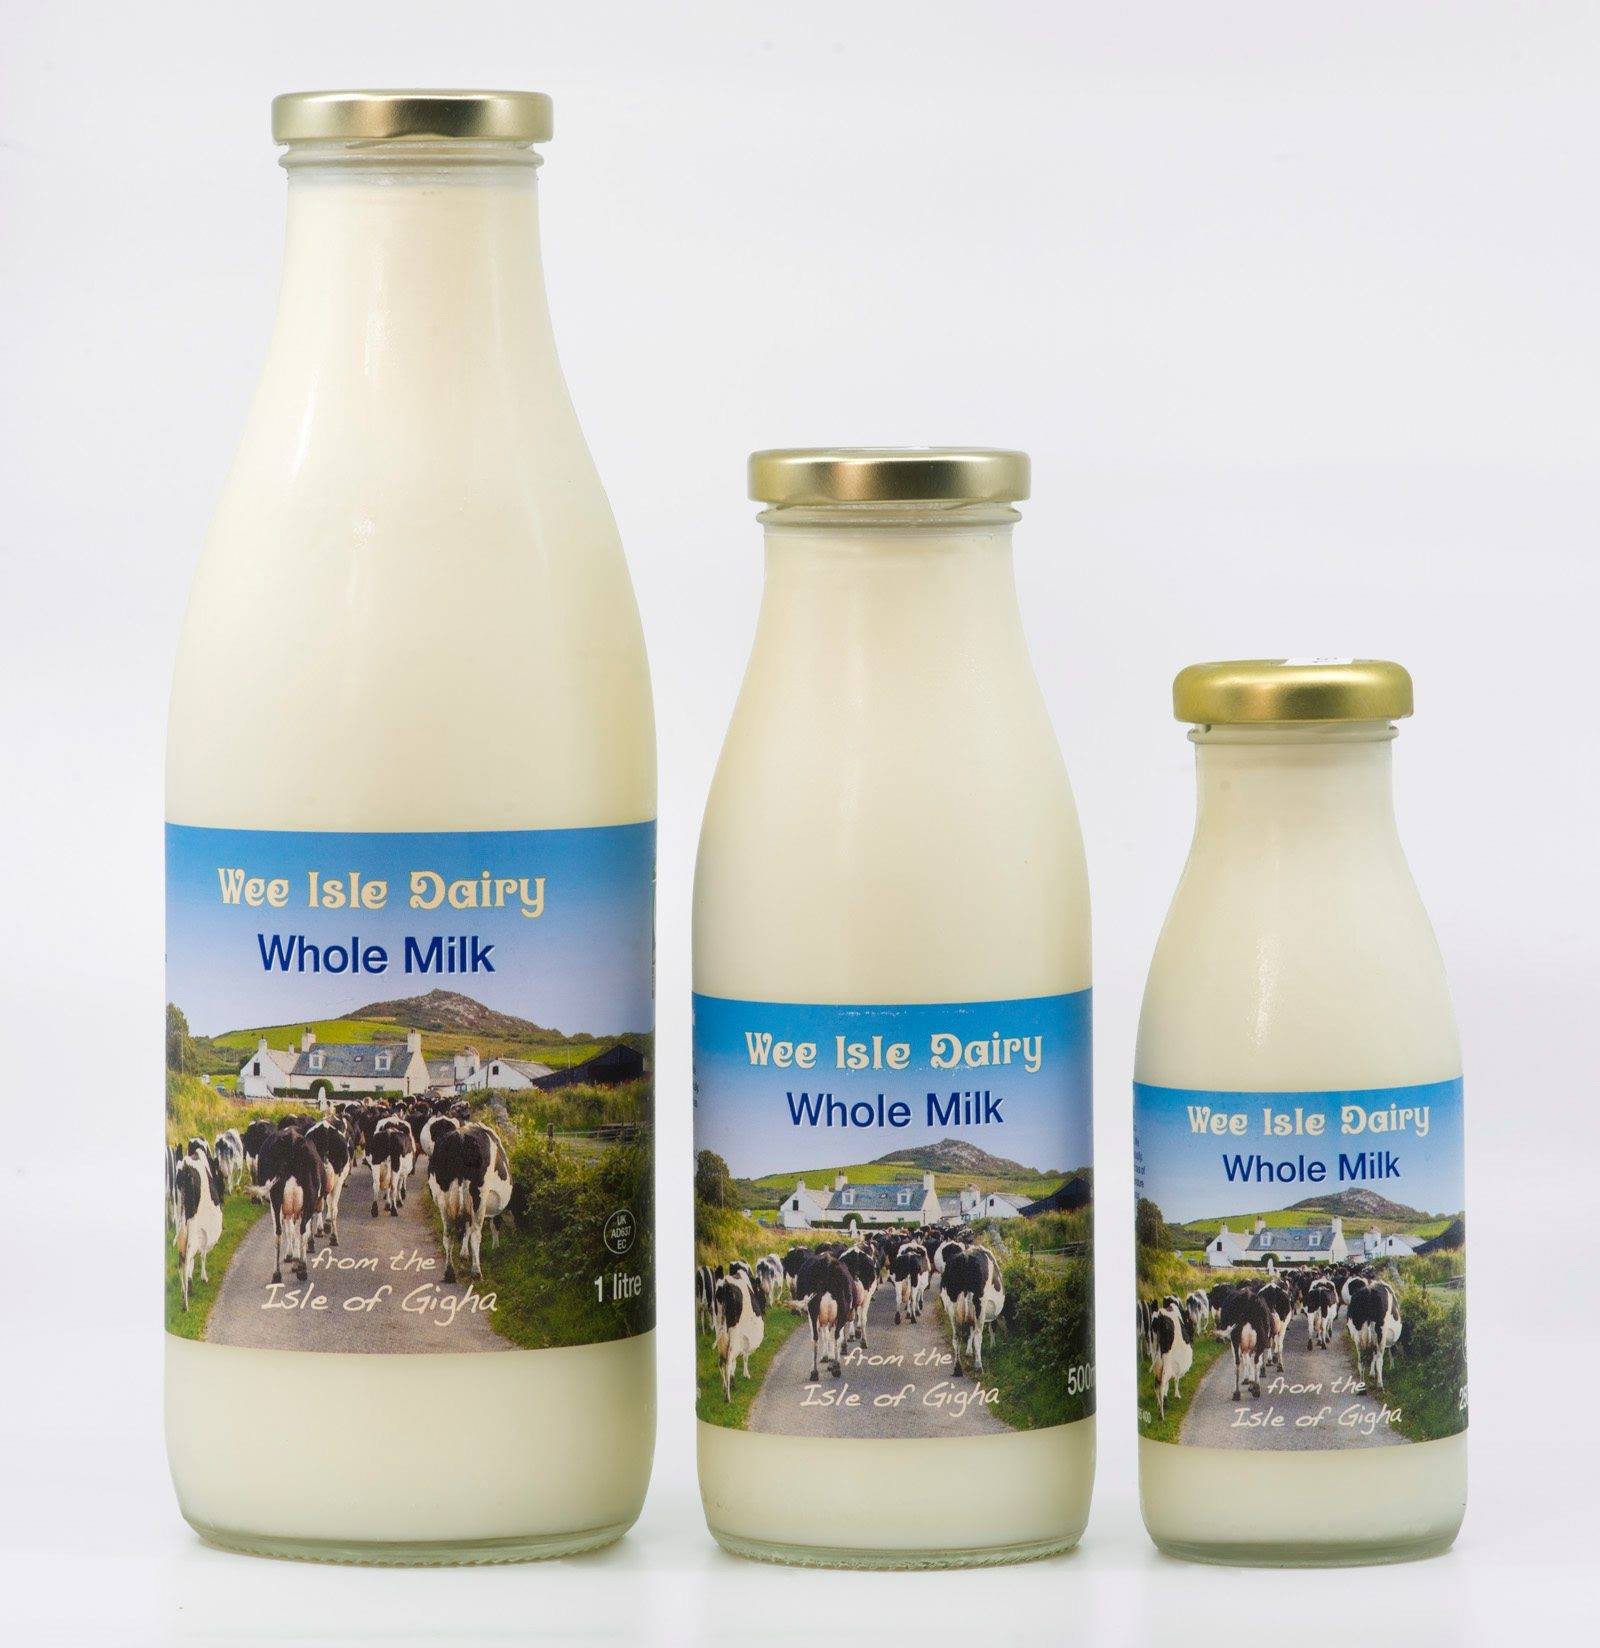 The various glass milk bottle sizes that the pasteurised milk is available in 